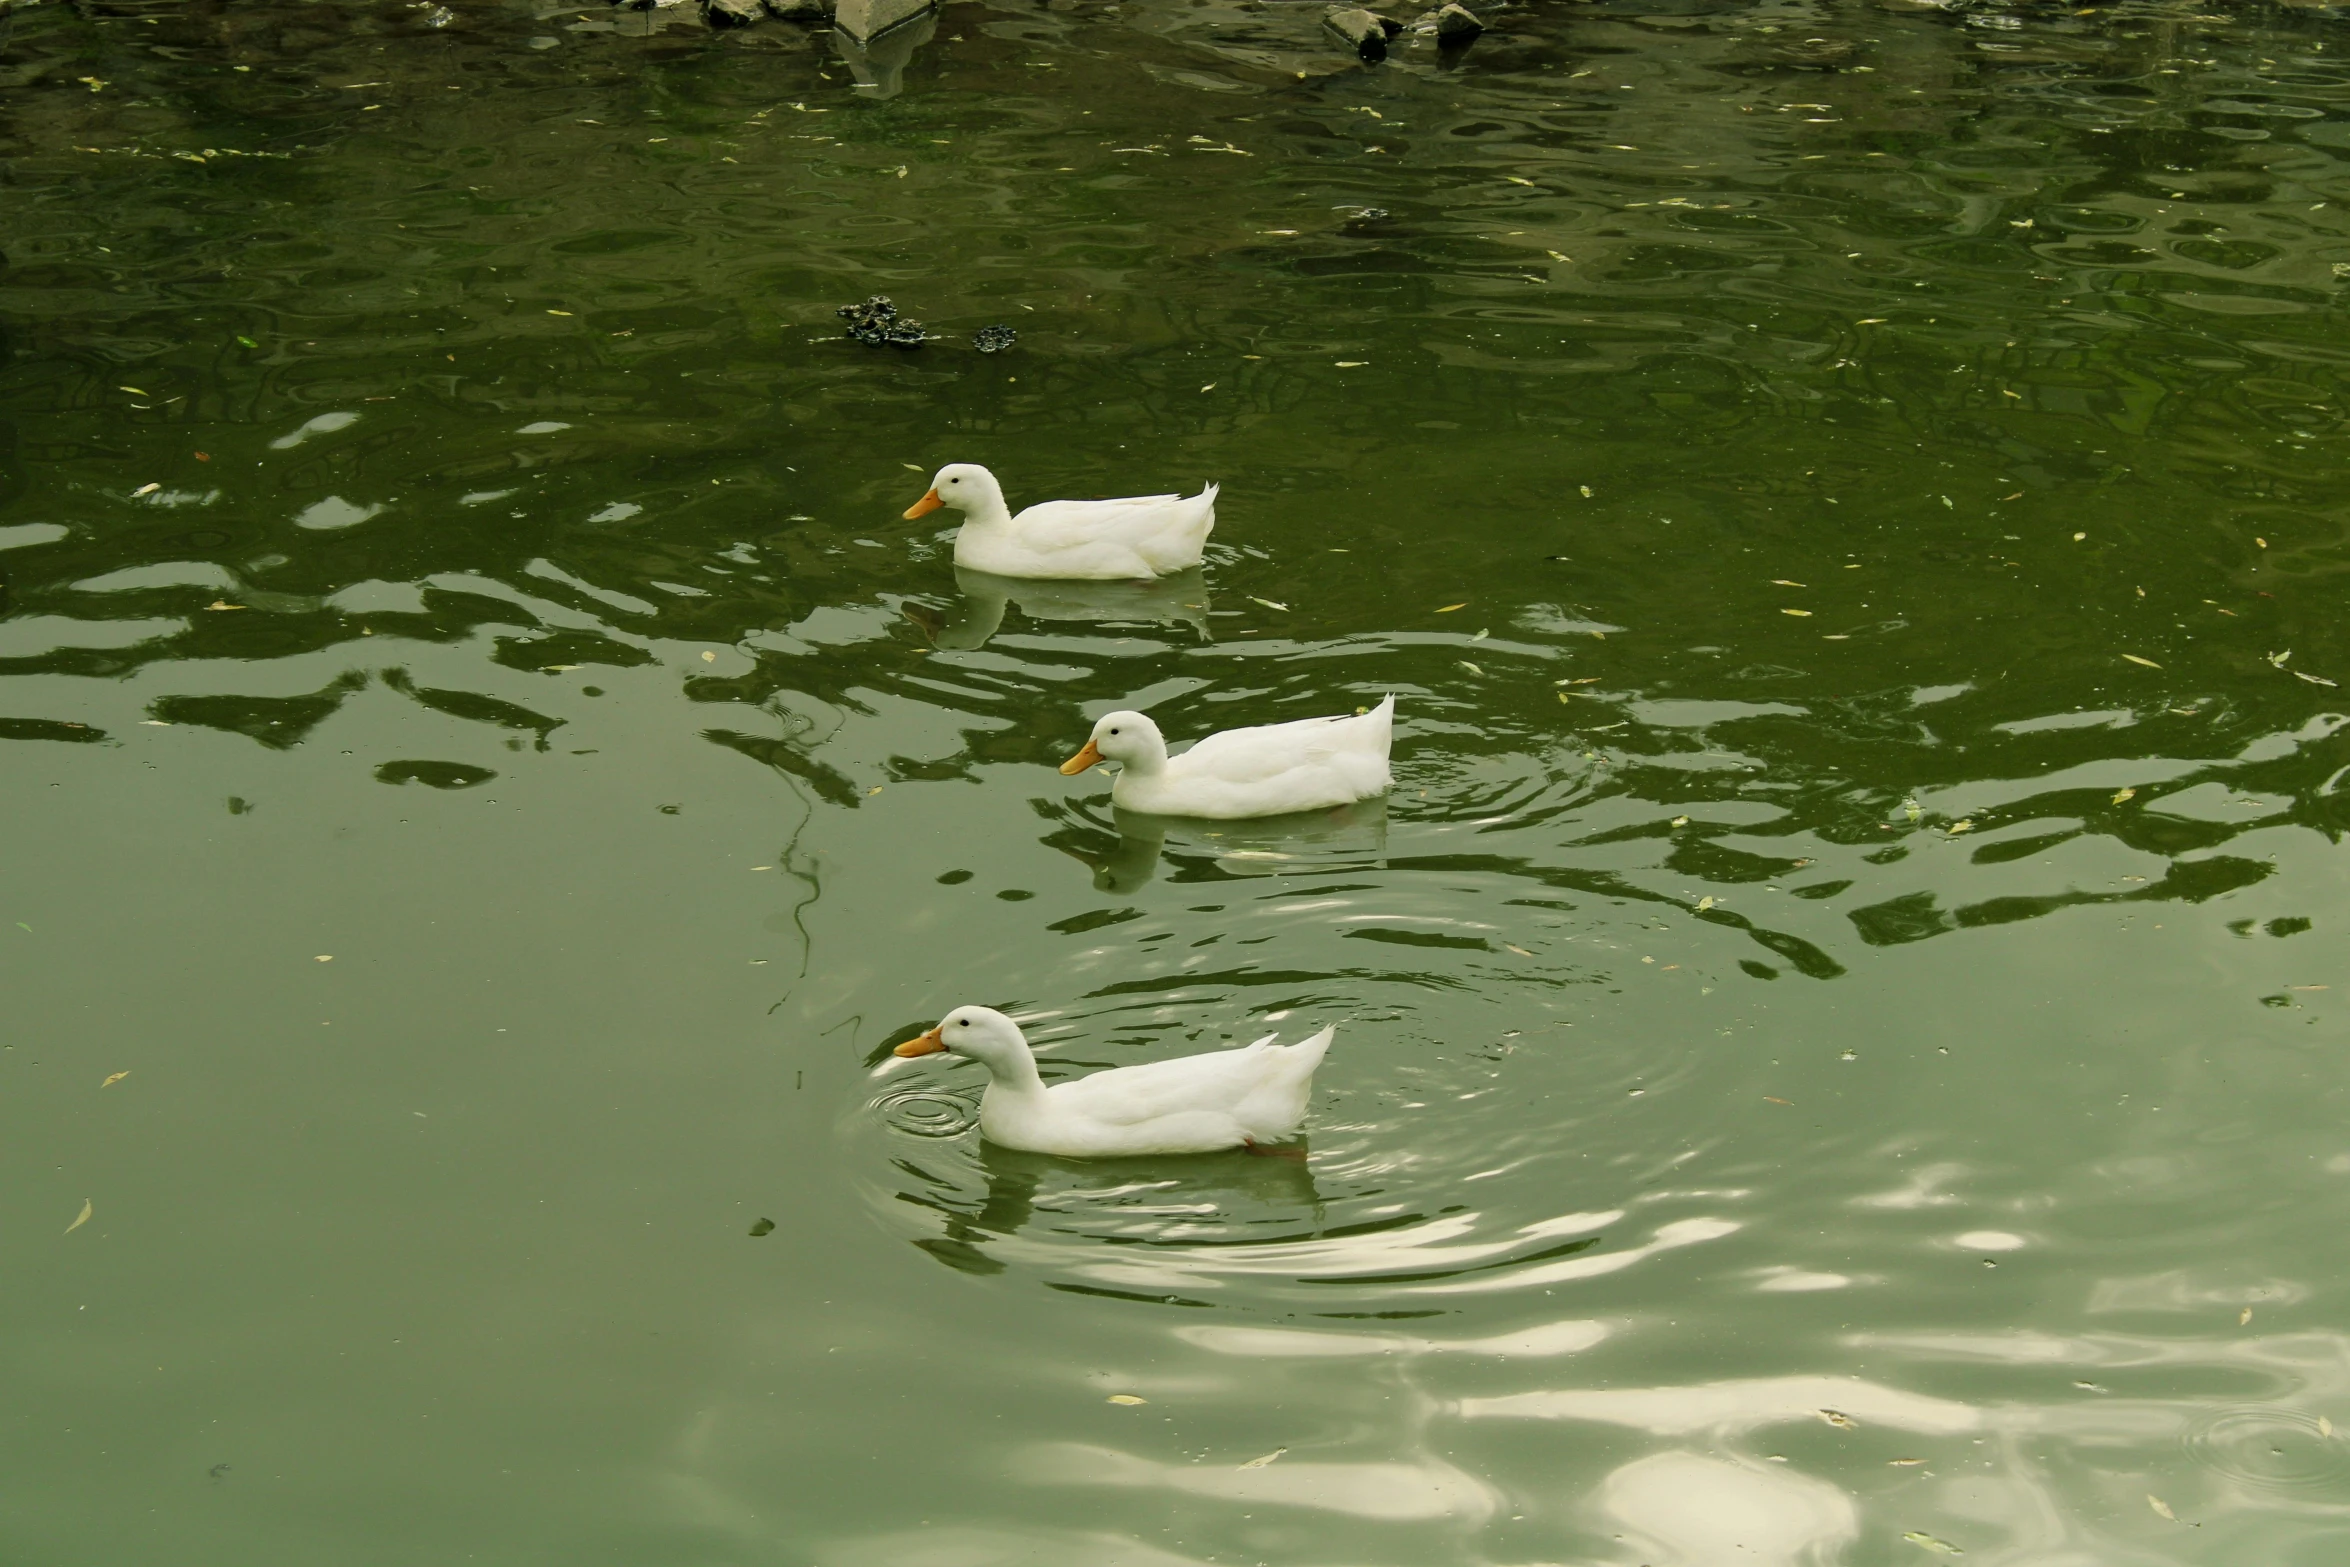 three ducks swimming in the water together